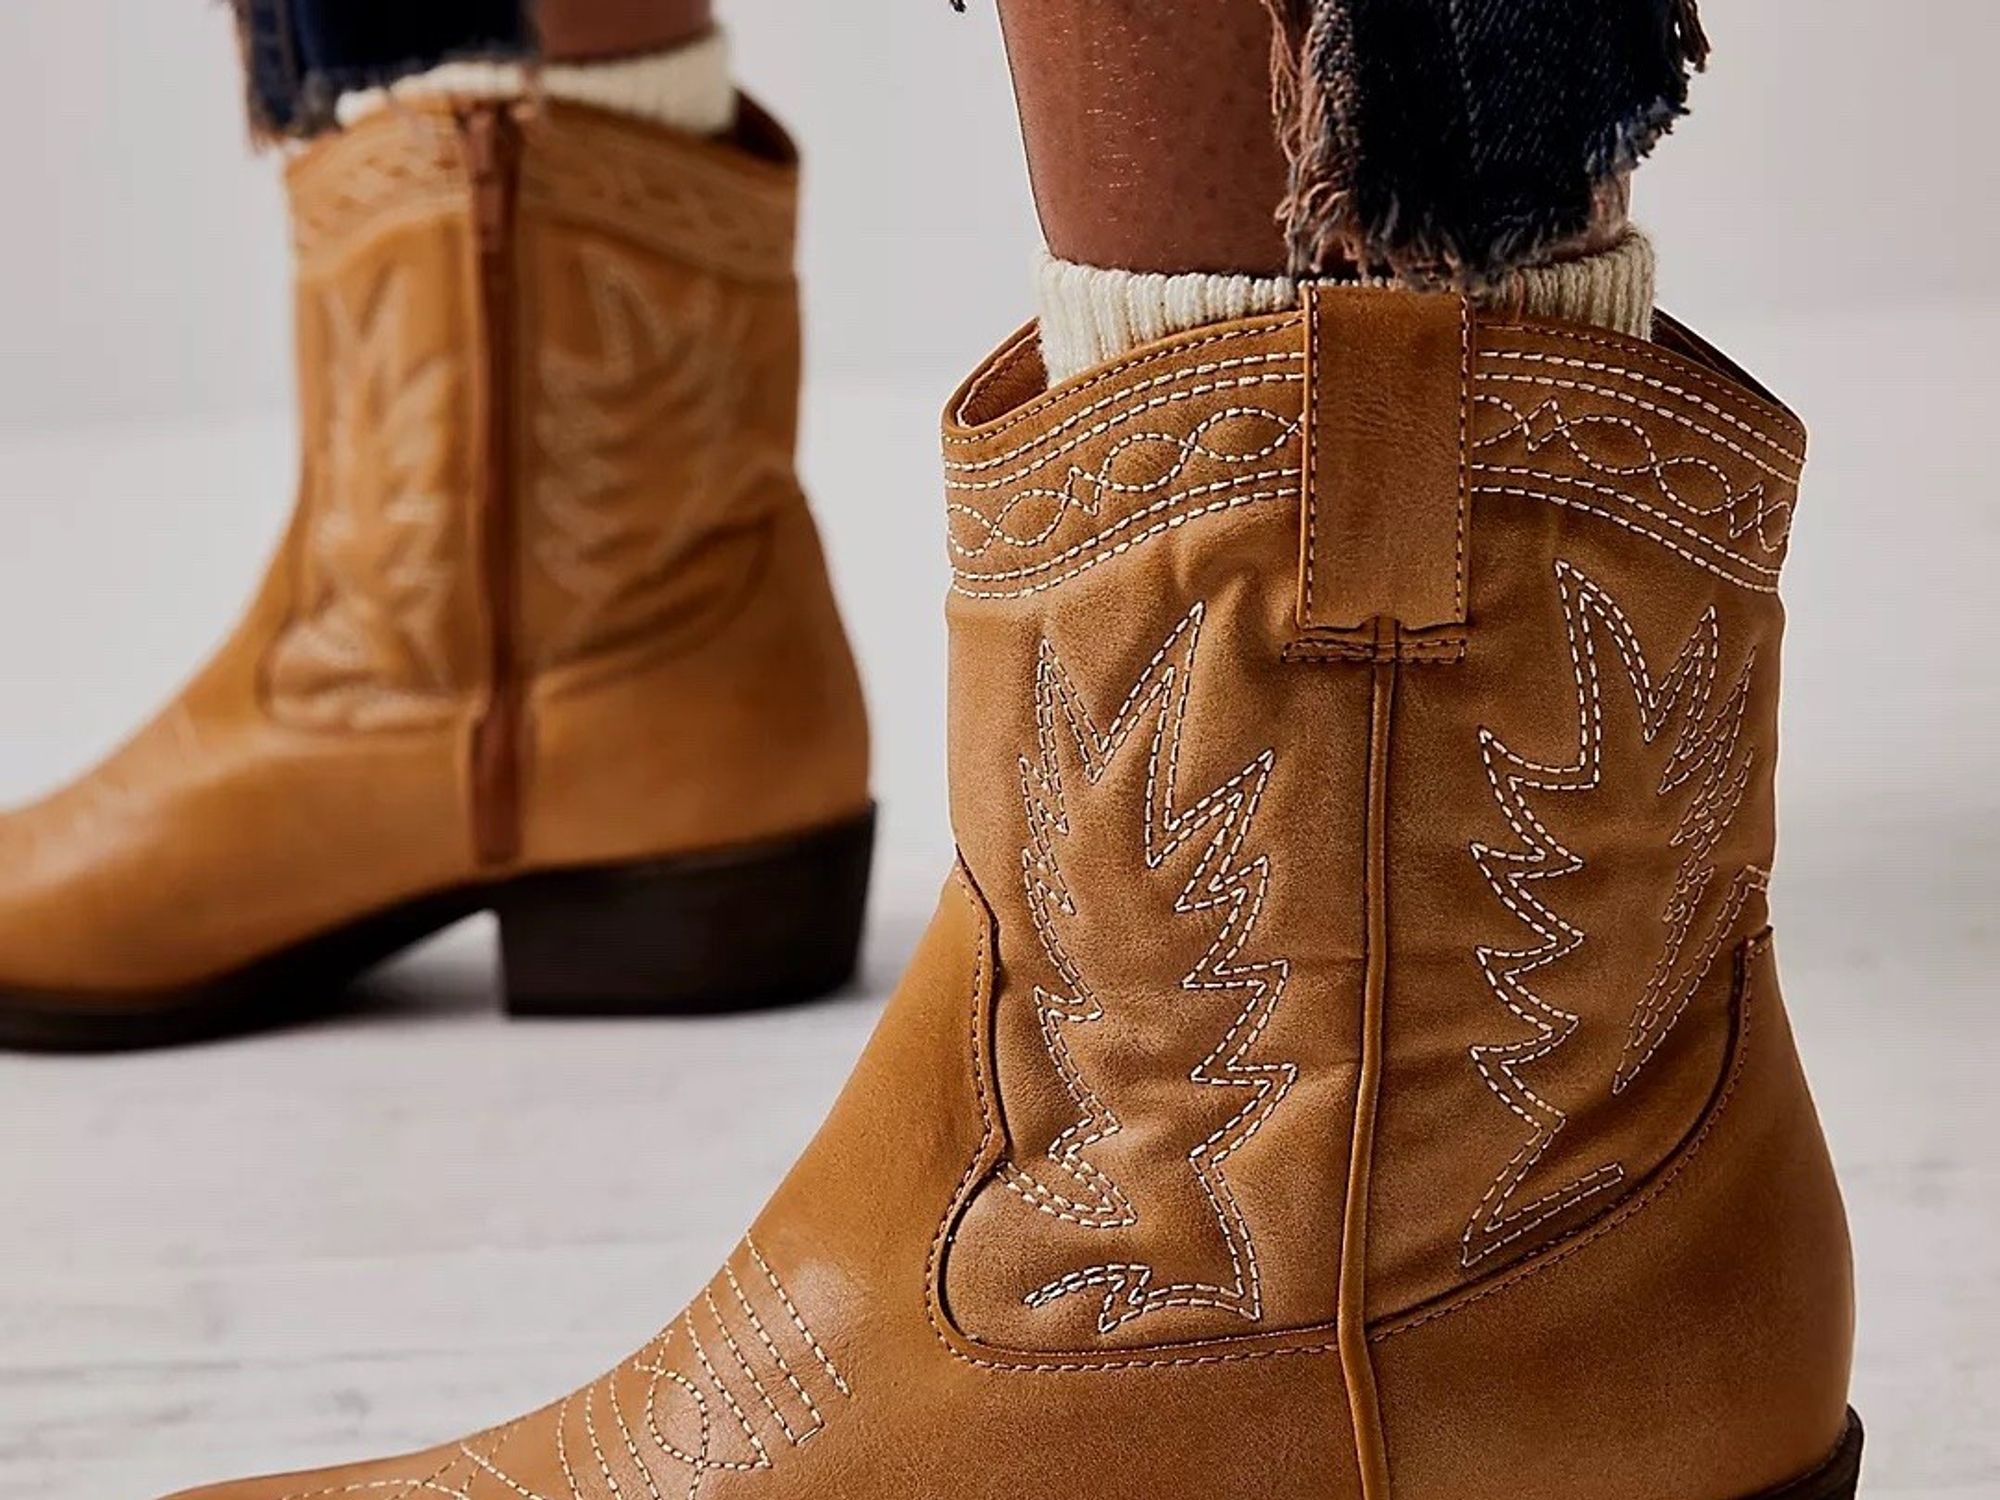 Cowgirl Boots To Embrace Yeehaw-Core - Brit + Co